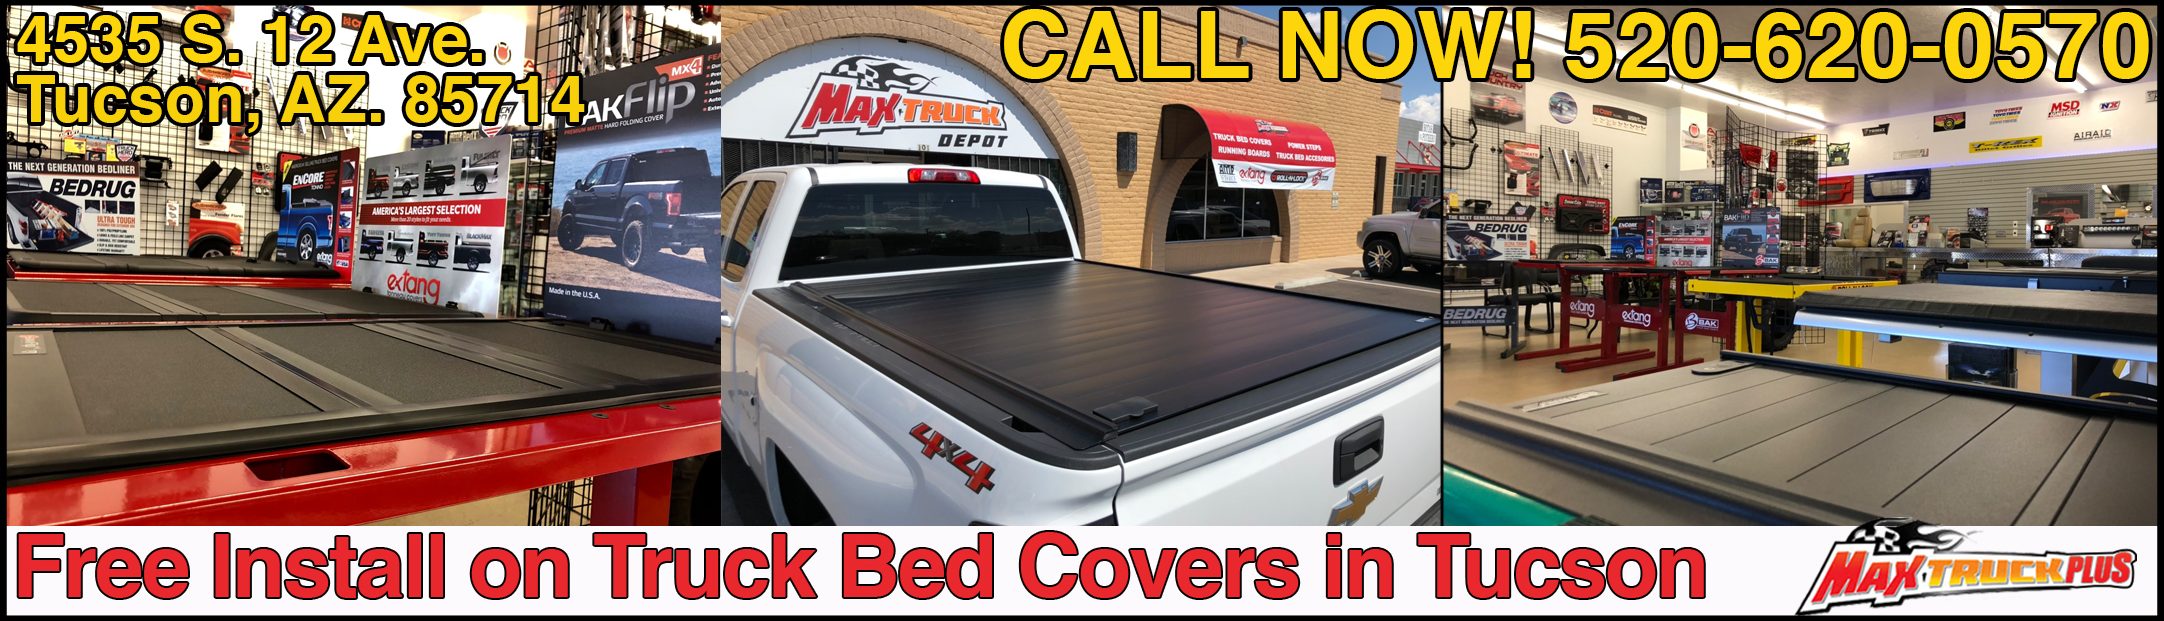 truck bed covers in tucson arizona 85714